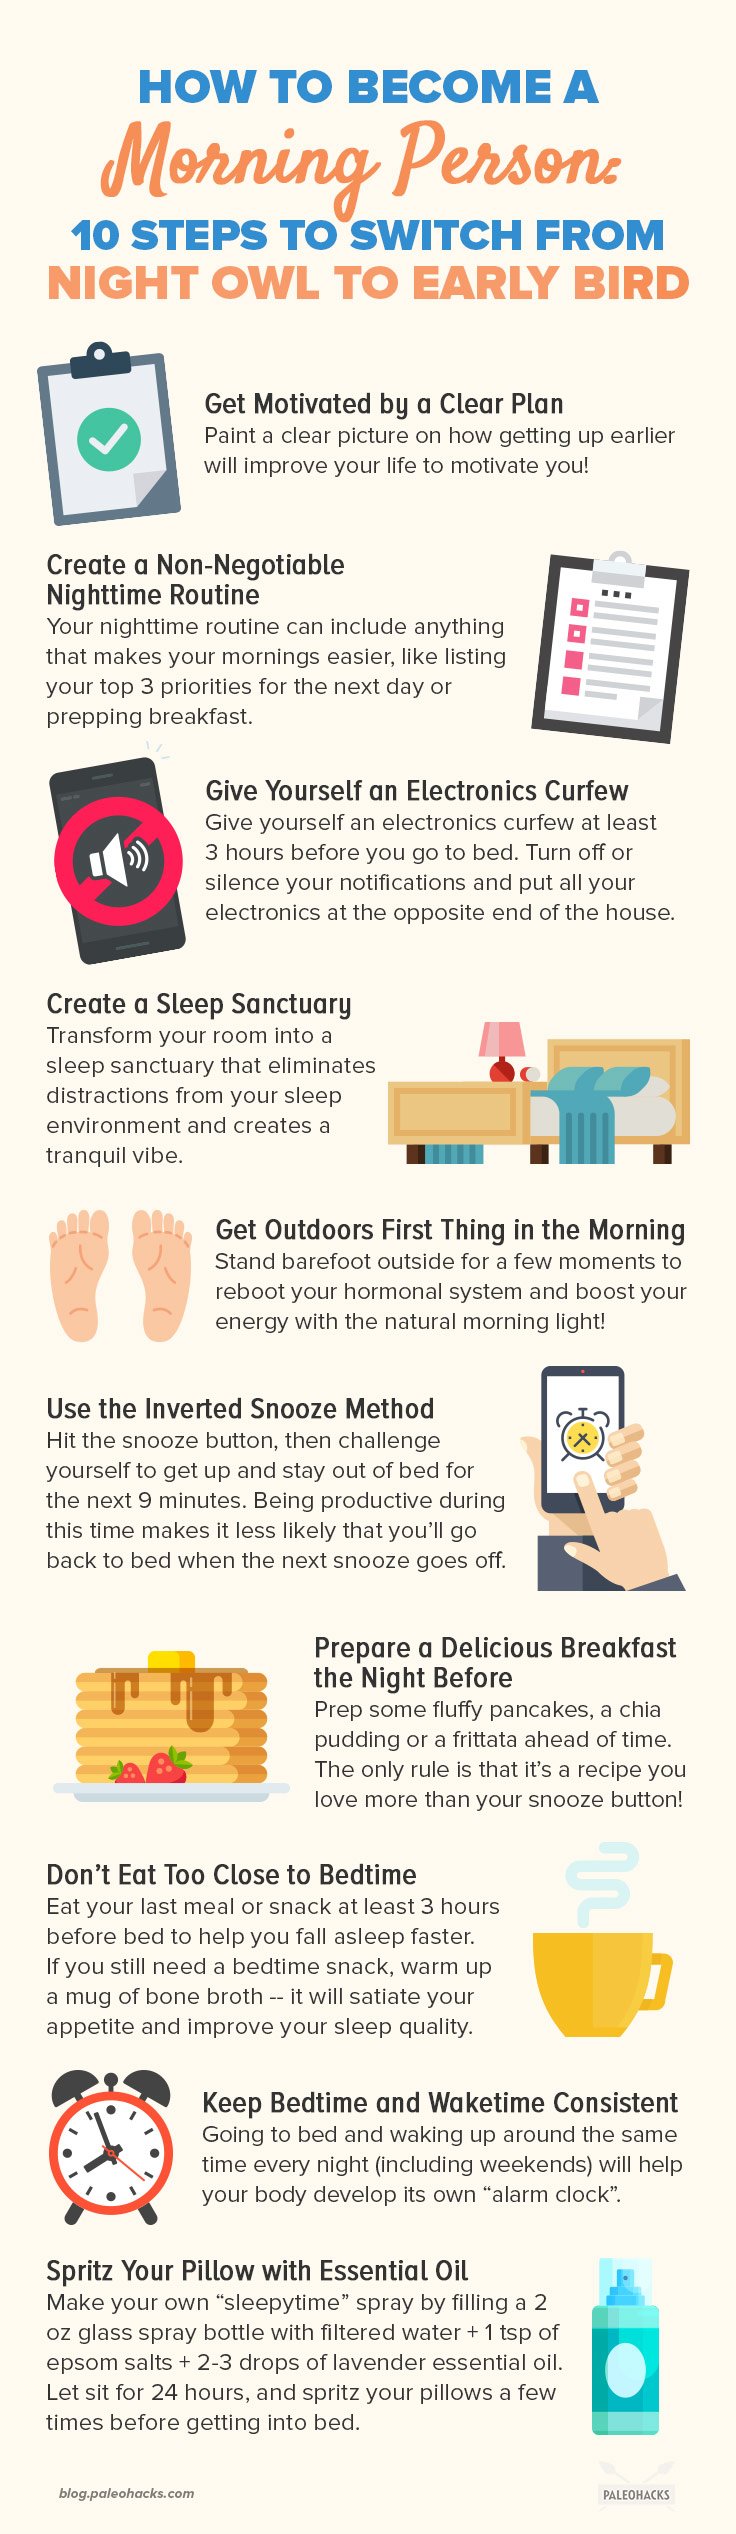 Here are 10 ways to get yourself out of bed in the morning, so you can make the best of every day.